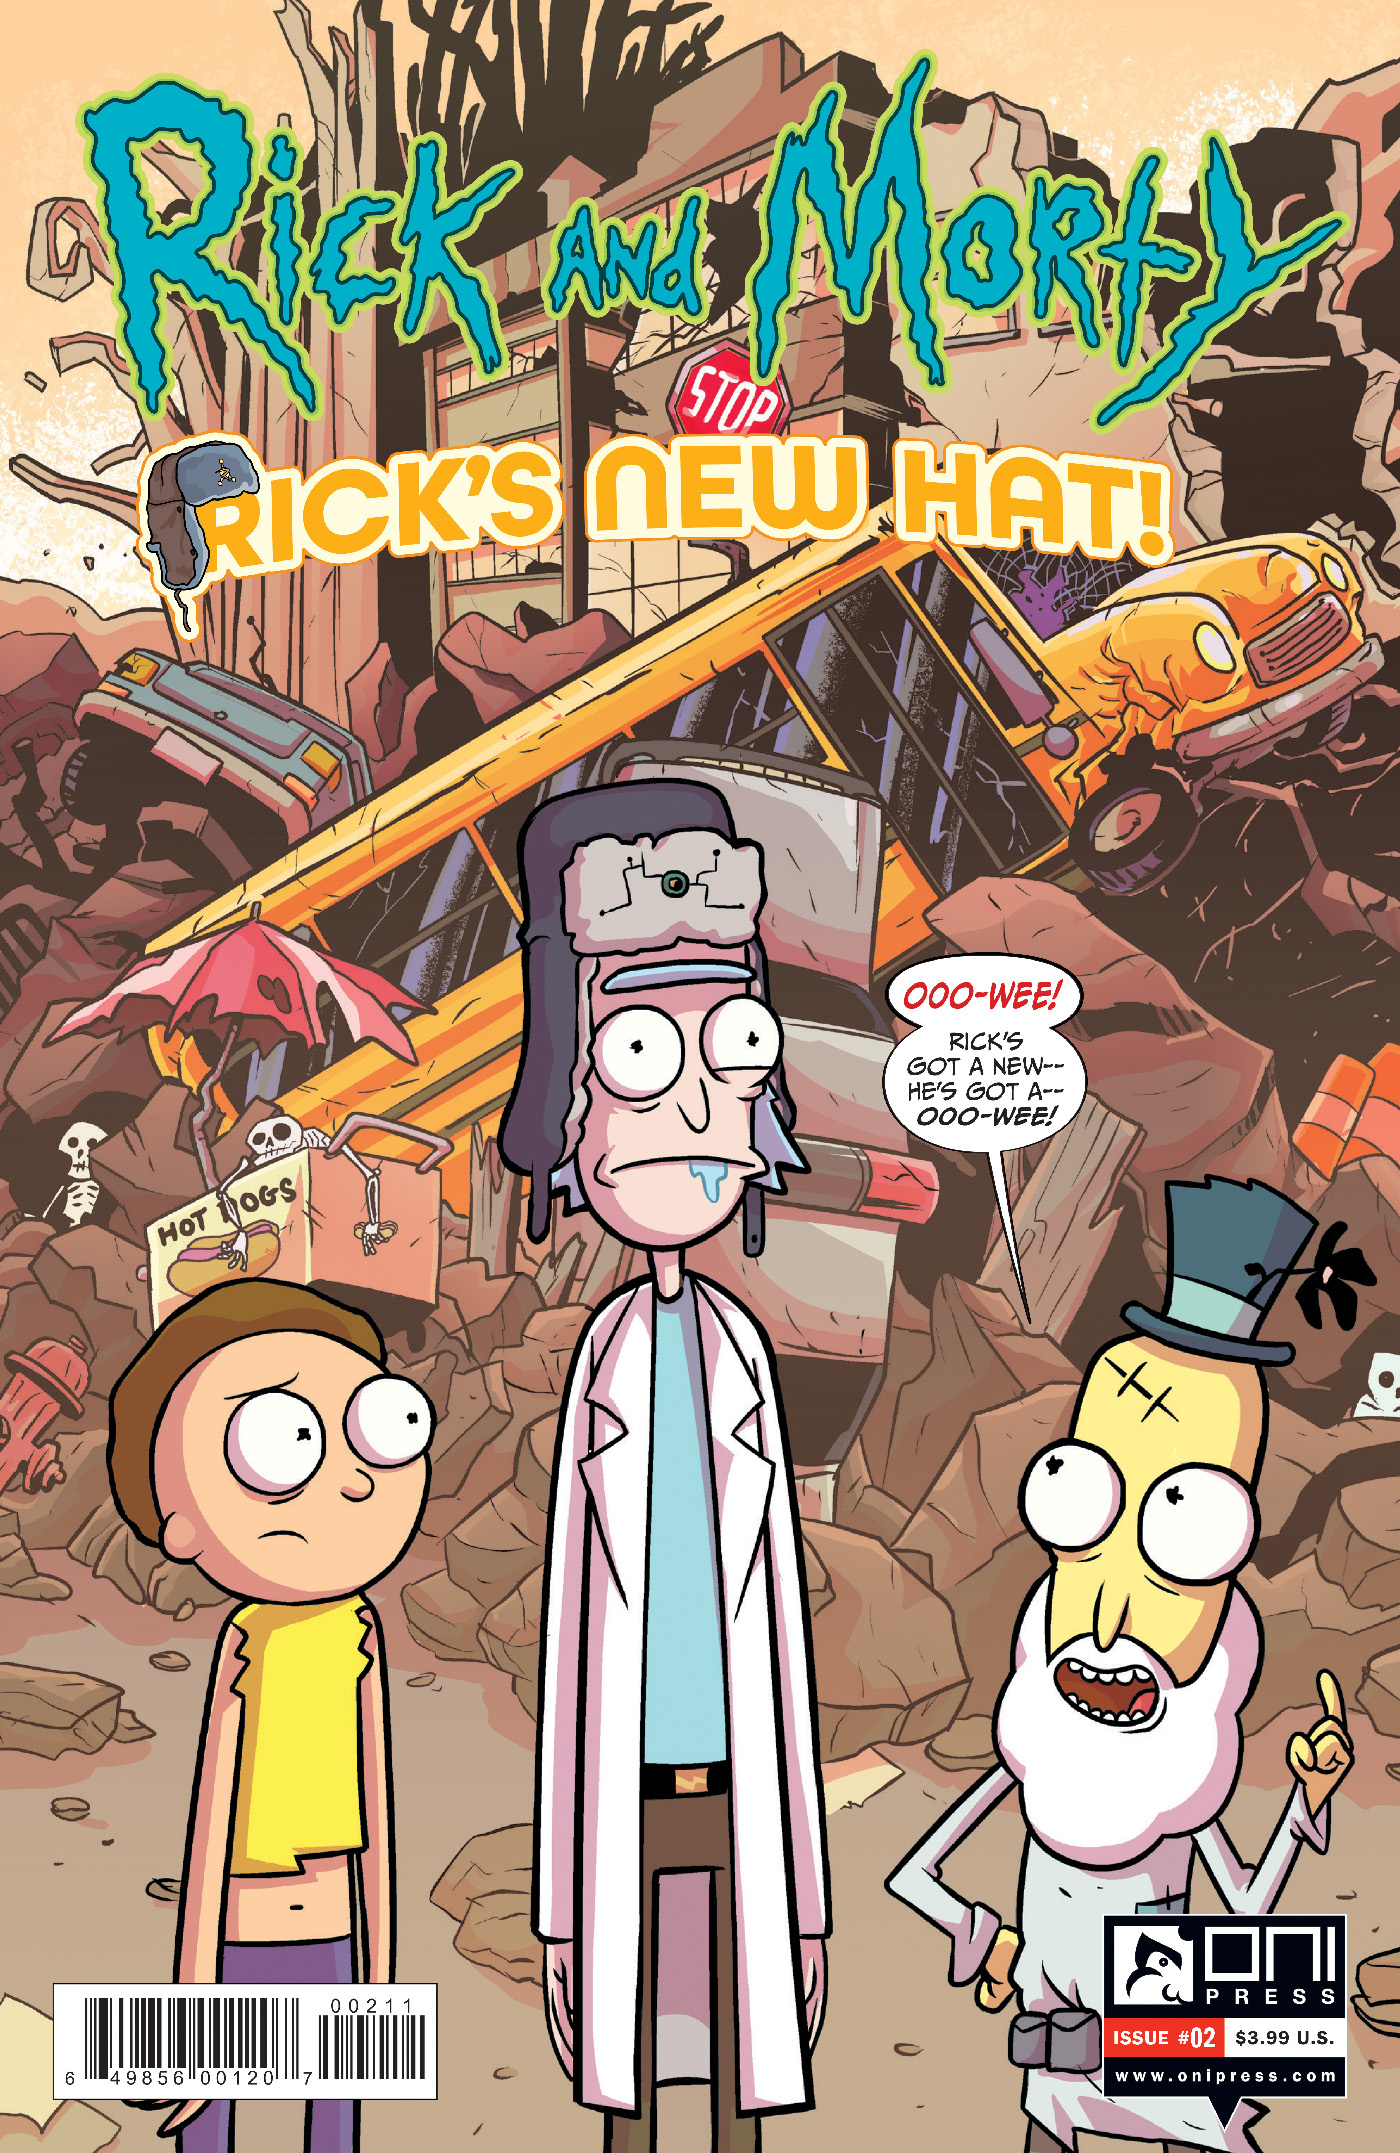 Rick and Morty Ricks New Hat #2 Cover A Stresing